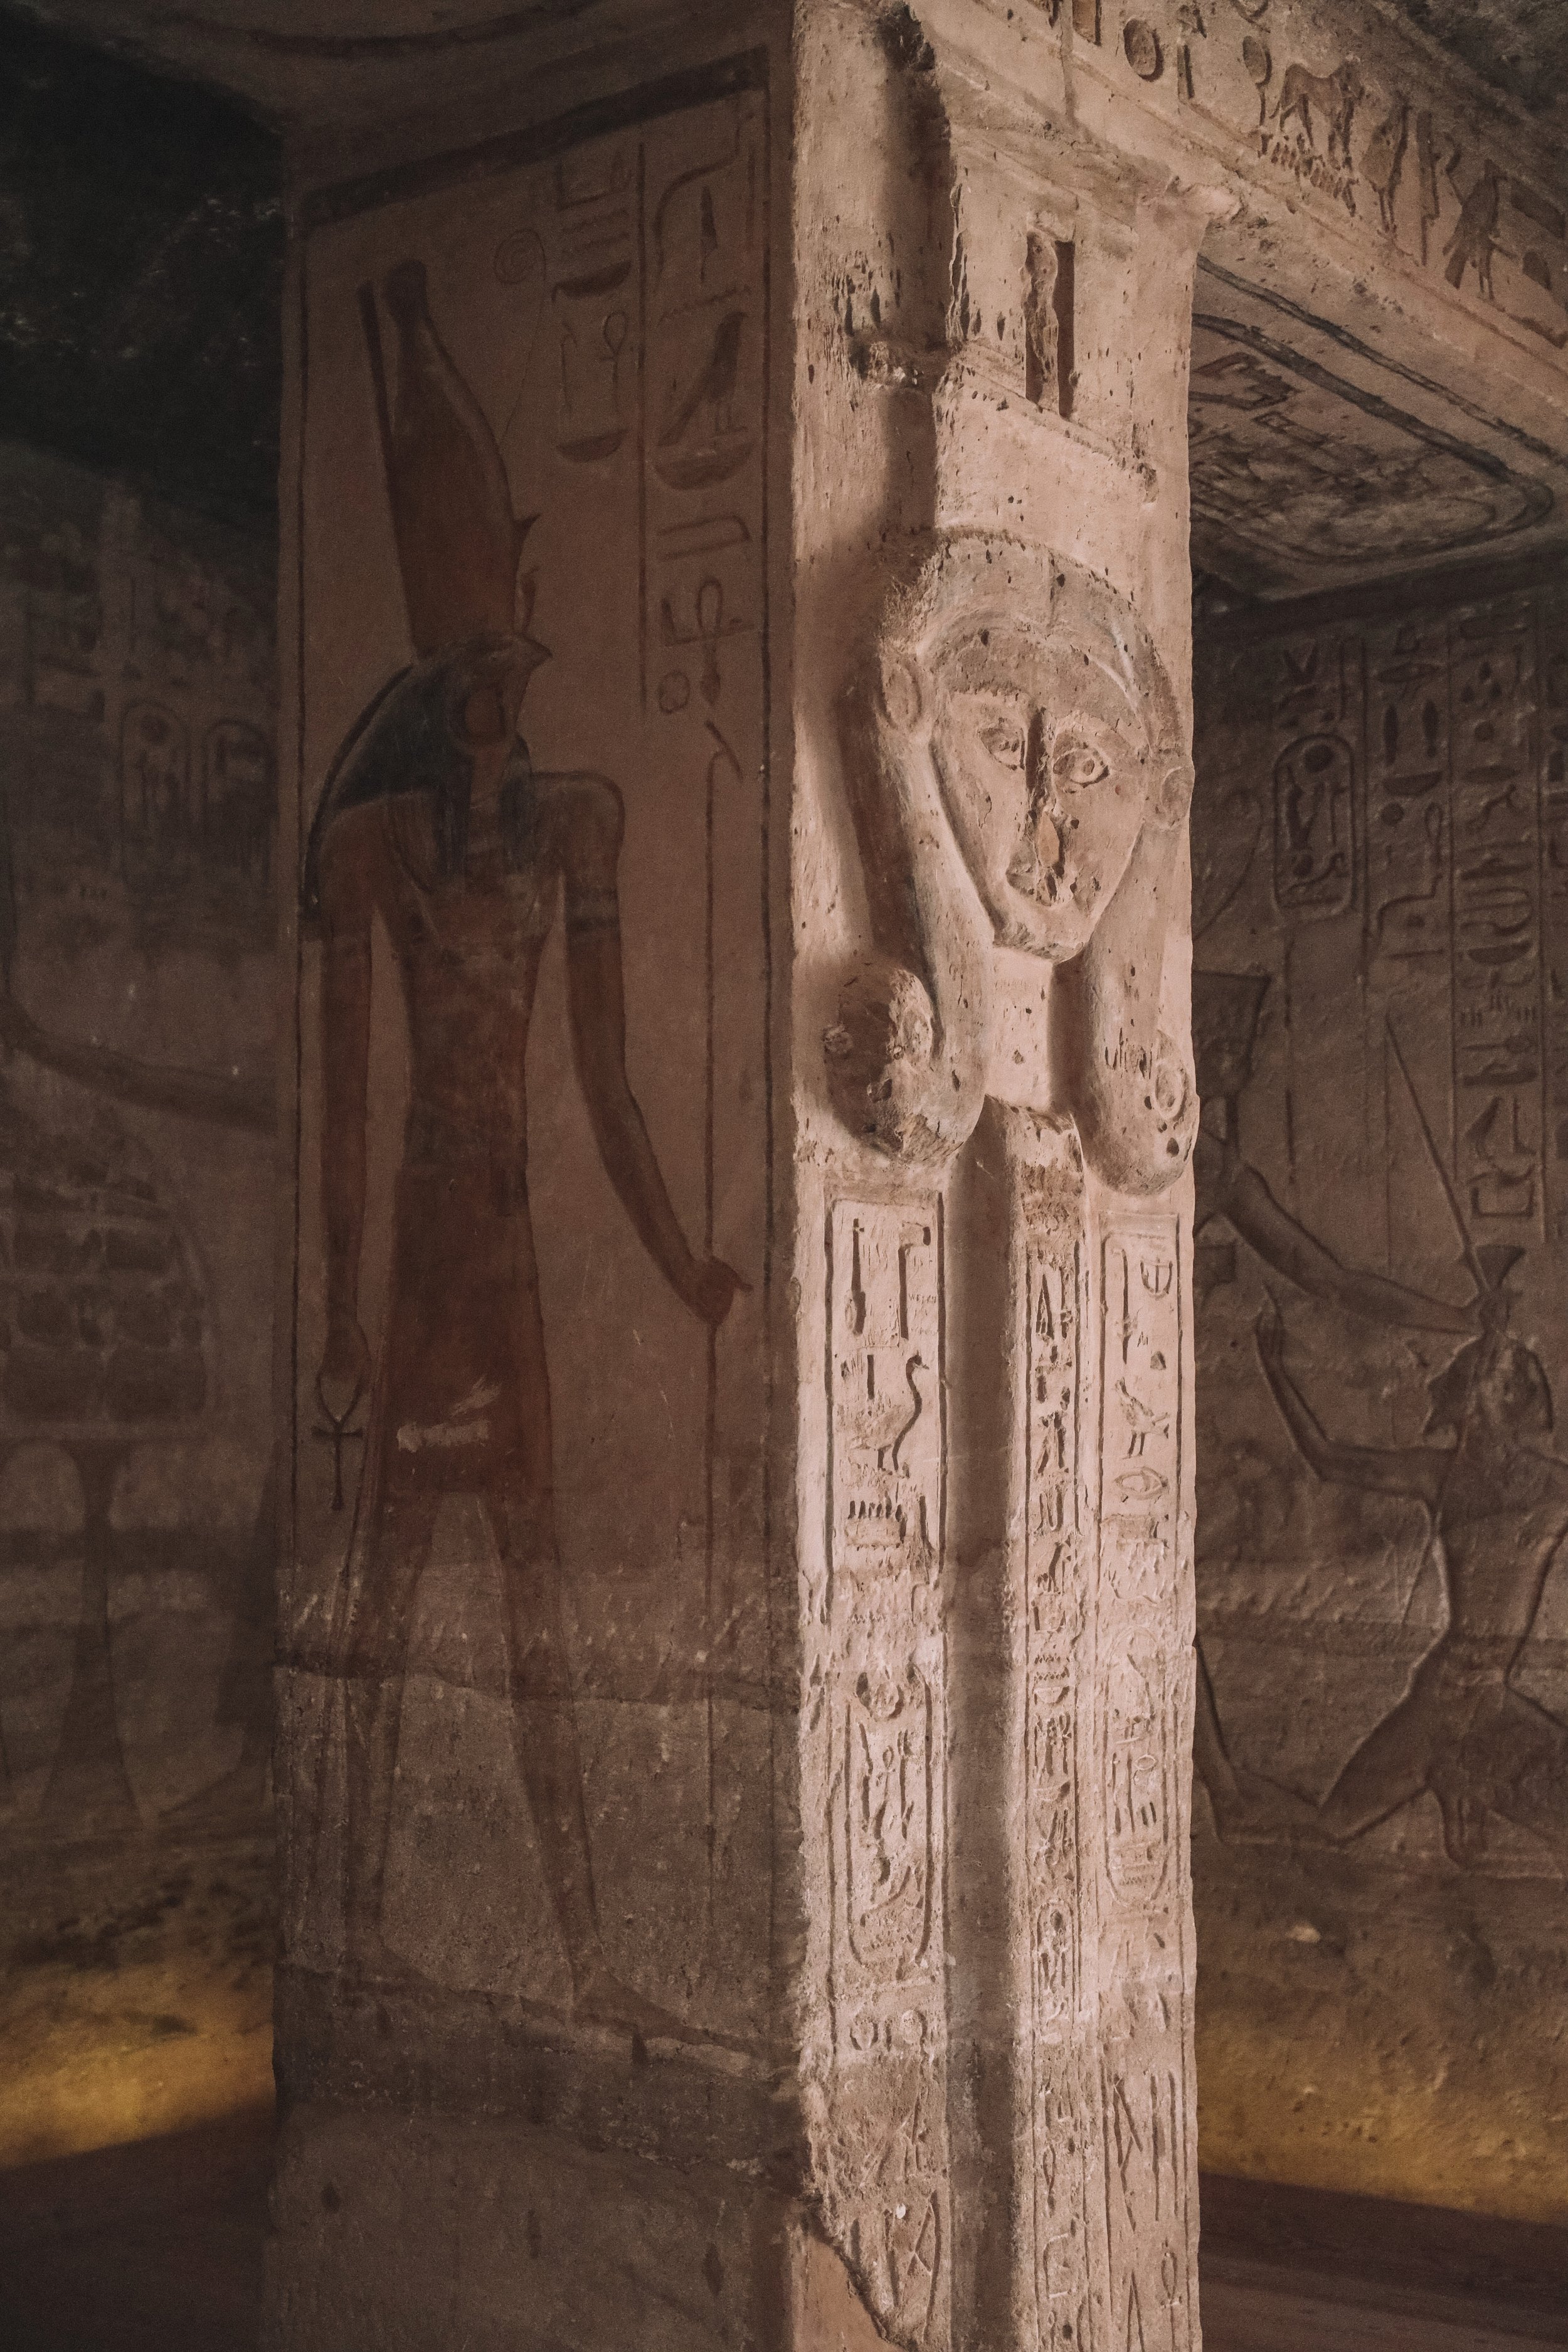 One of the columns inside the temple - Abu Simbel - Egypt